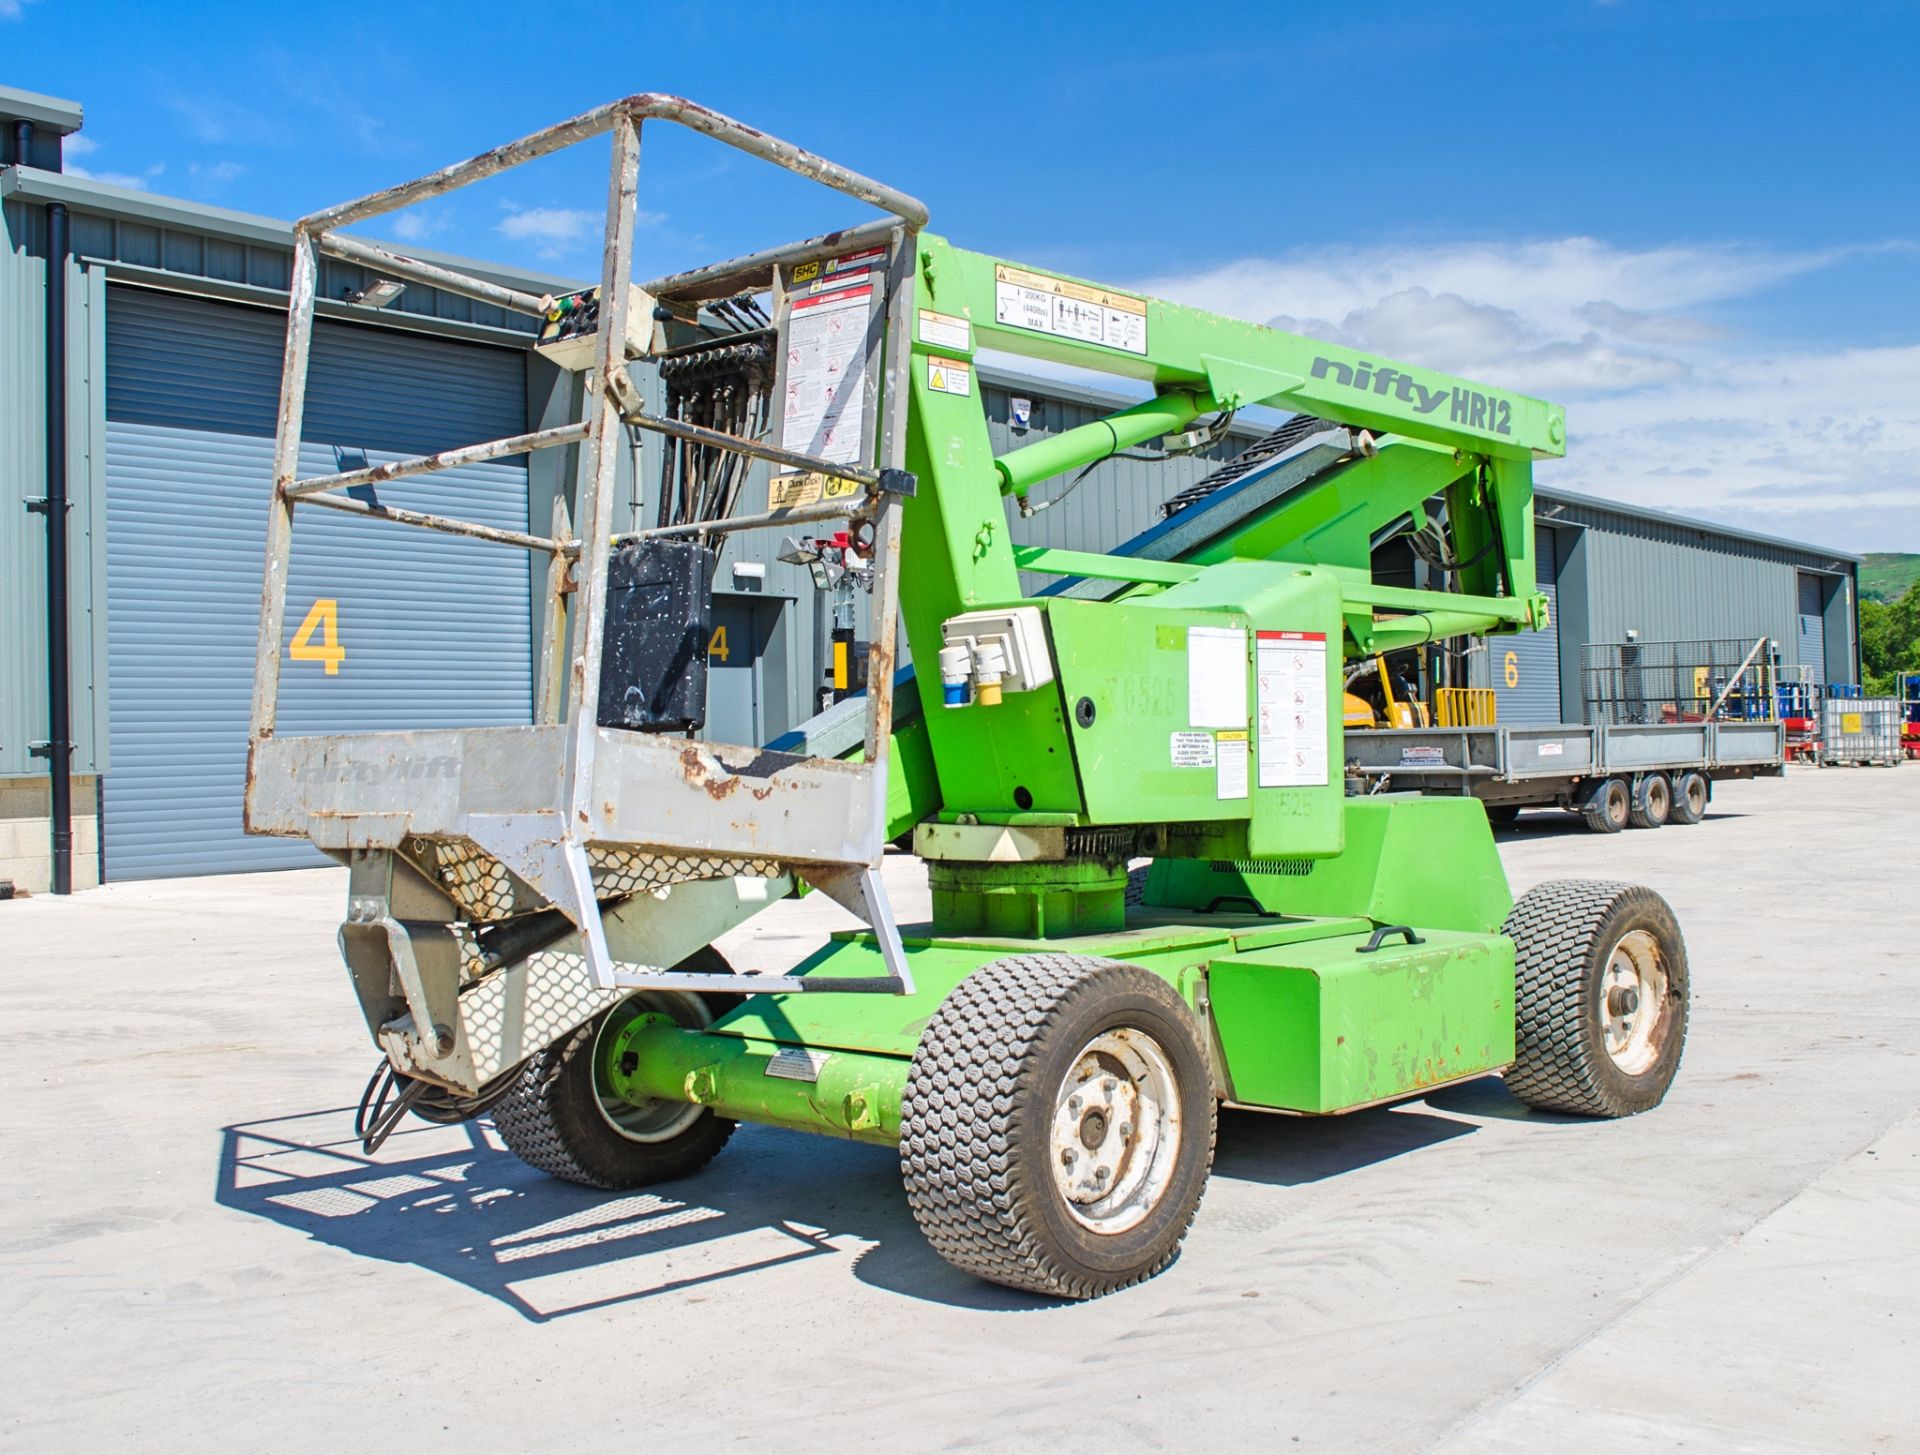 Nifty HR12 battery electric/diesel articulated boom lift access platform Year: 2007 S/N: 16530 SHC